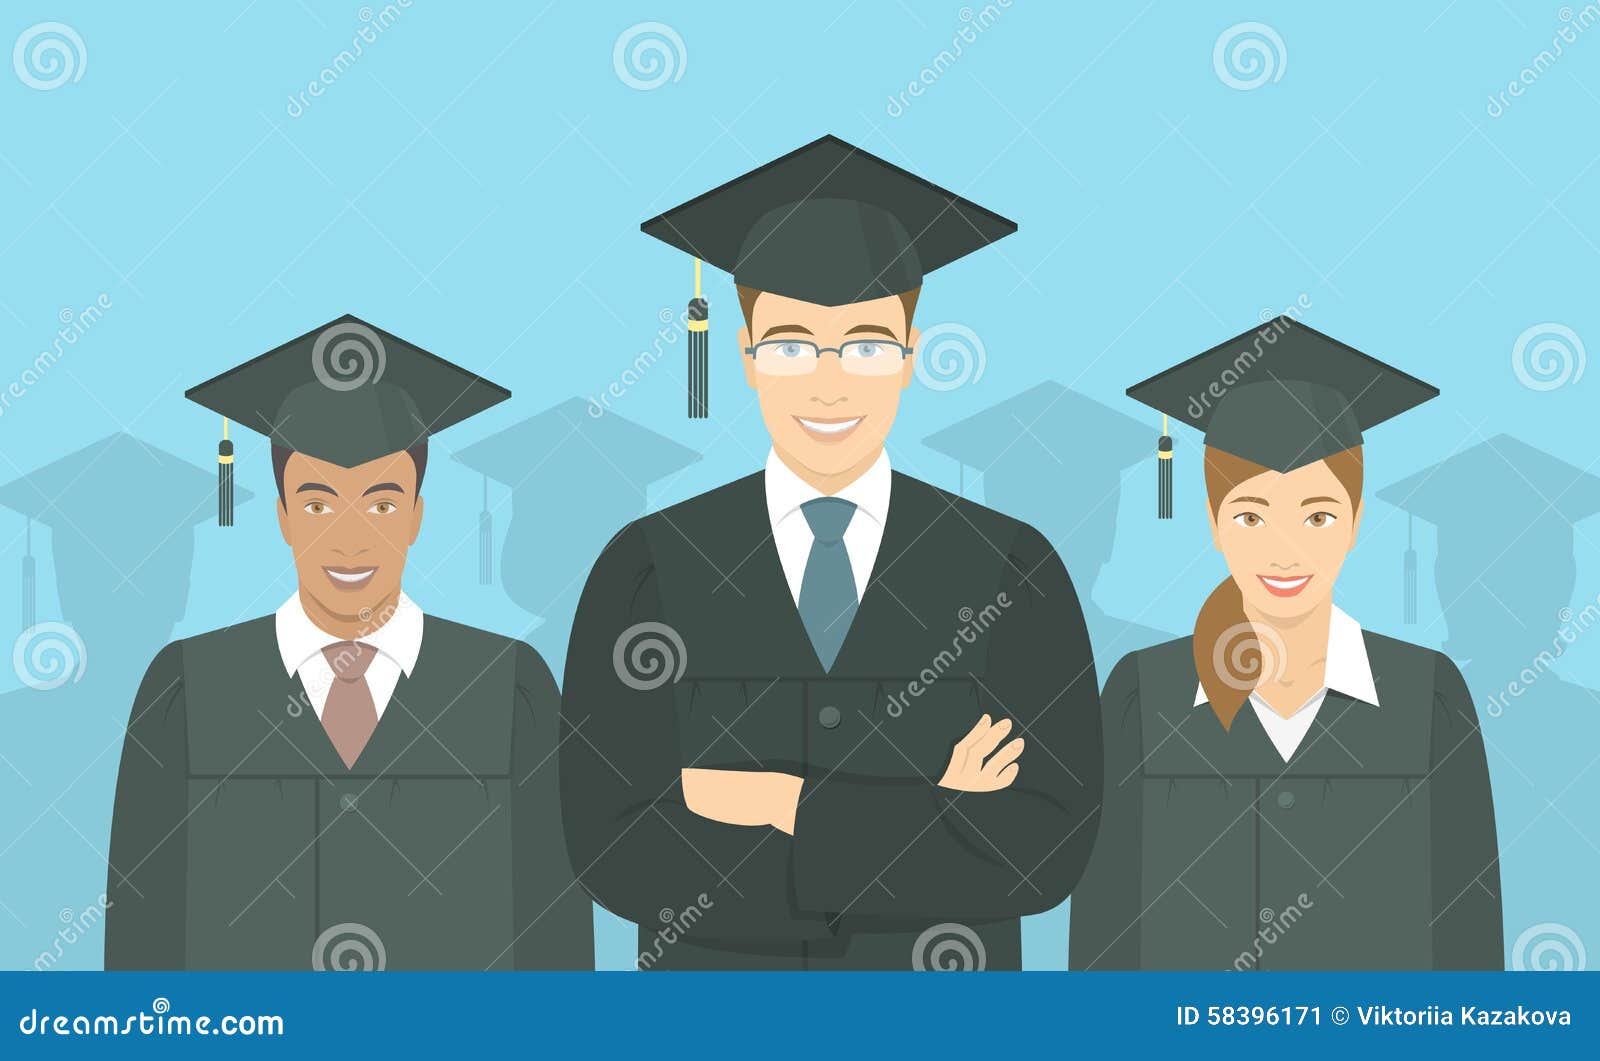 young people graduate bachelor degree flat concept